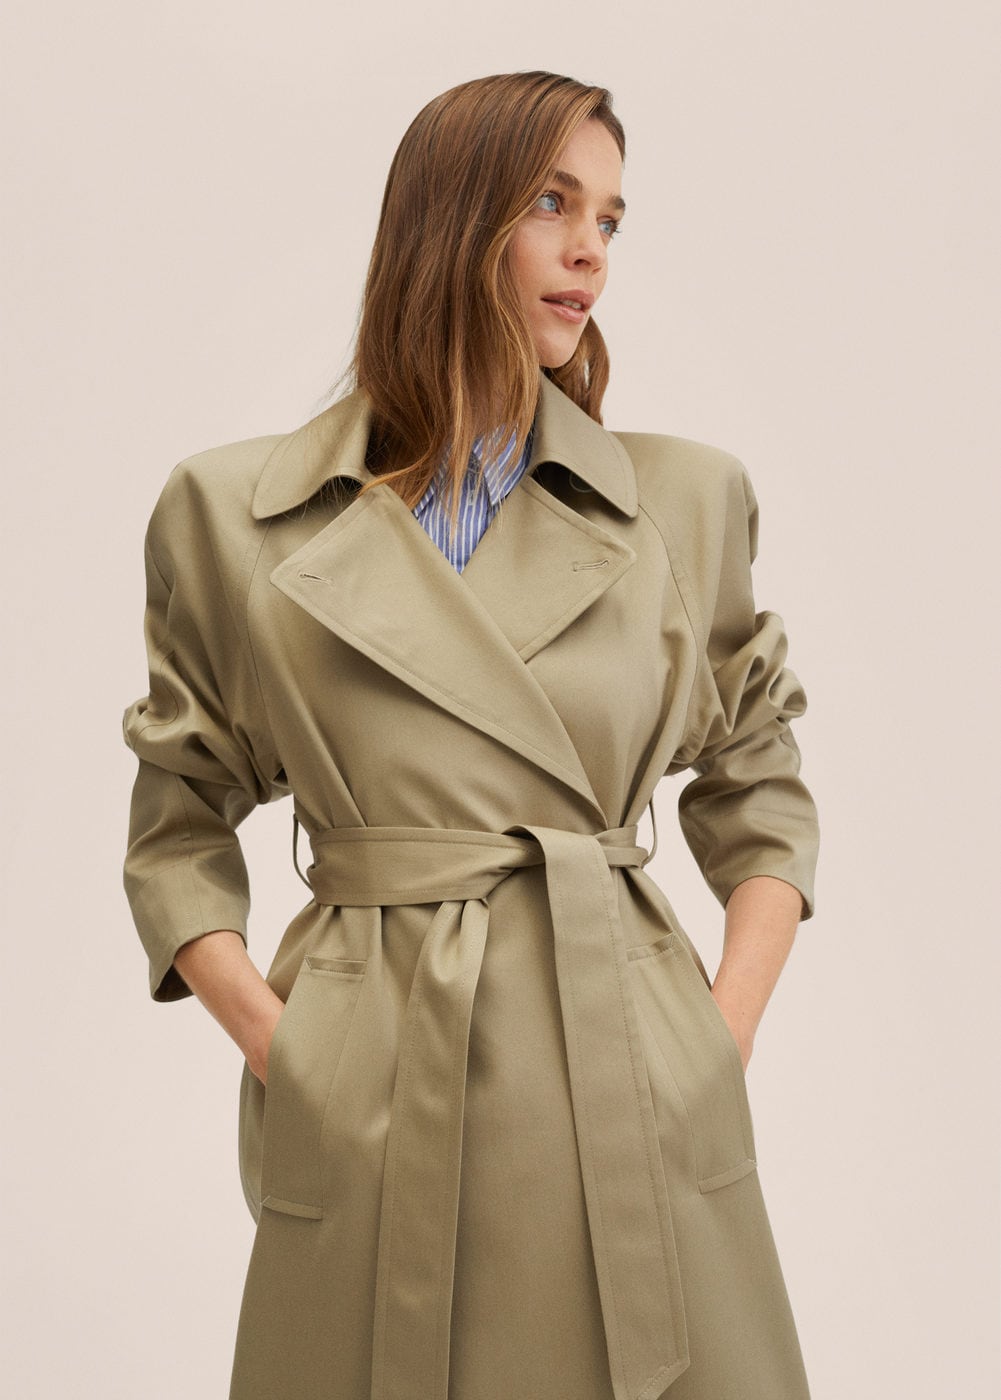 Mango's Yellow Coat Is a Dream for Statement-Outwear Lovers | Who What ...